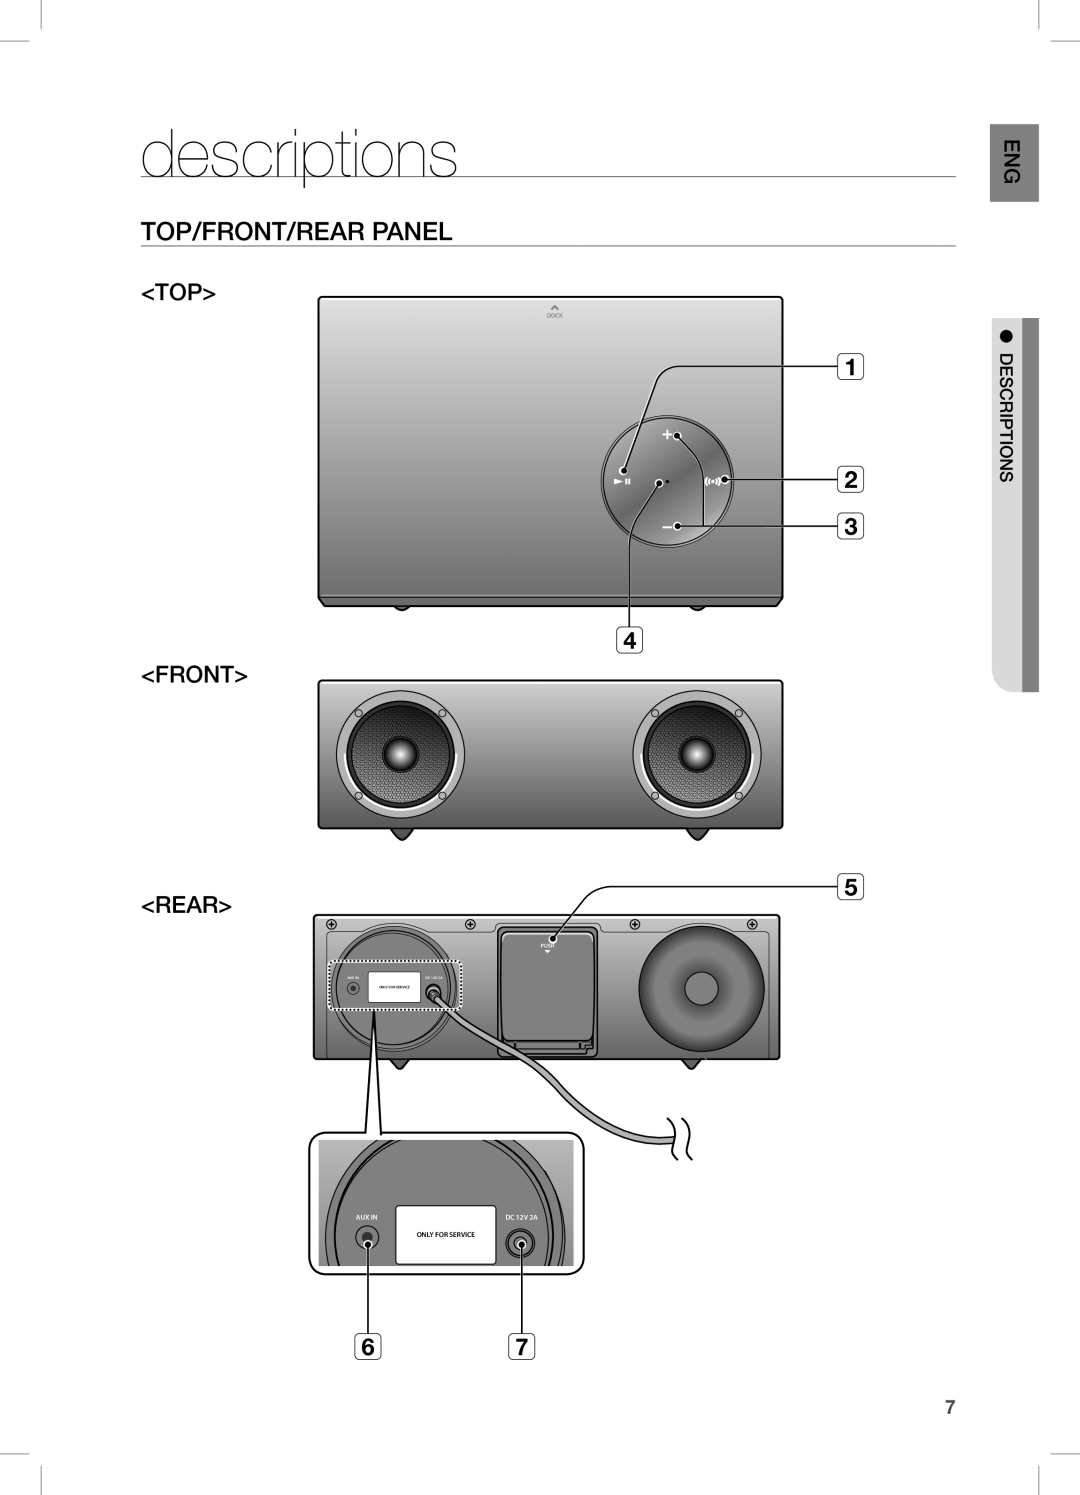 Samsung DA-E570 user manual descriptions, TOP/Front/Rear Panel, Top, Aux In, Only For Service, Dock, DC 12V 2A, Push 